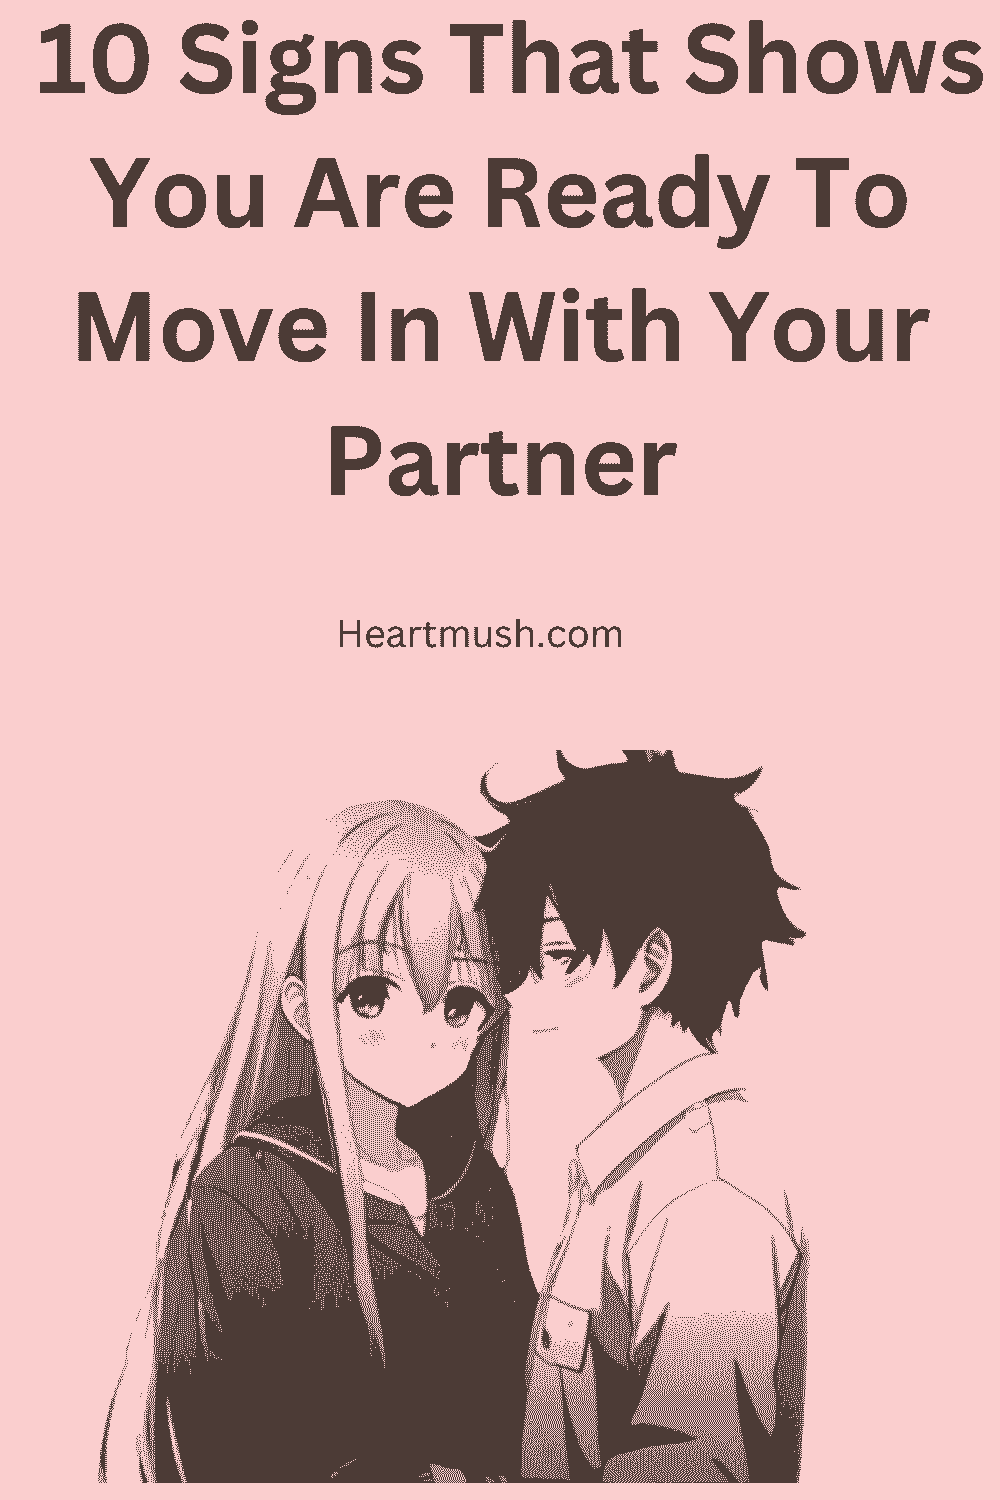 Signs That Shows You Are Ready To Move In With Your Partner